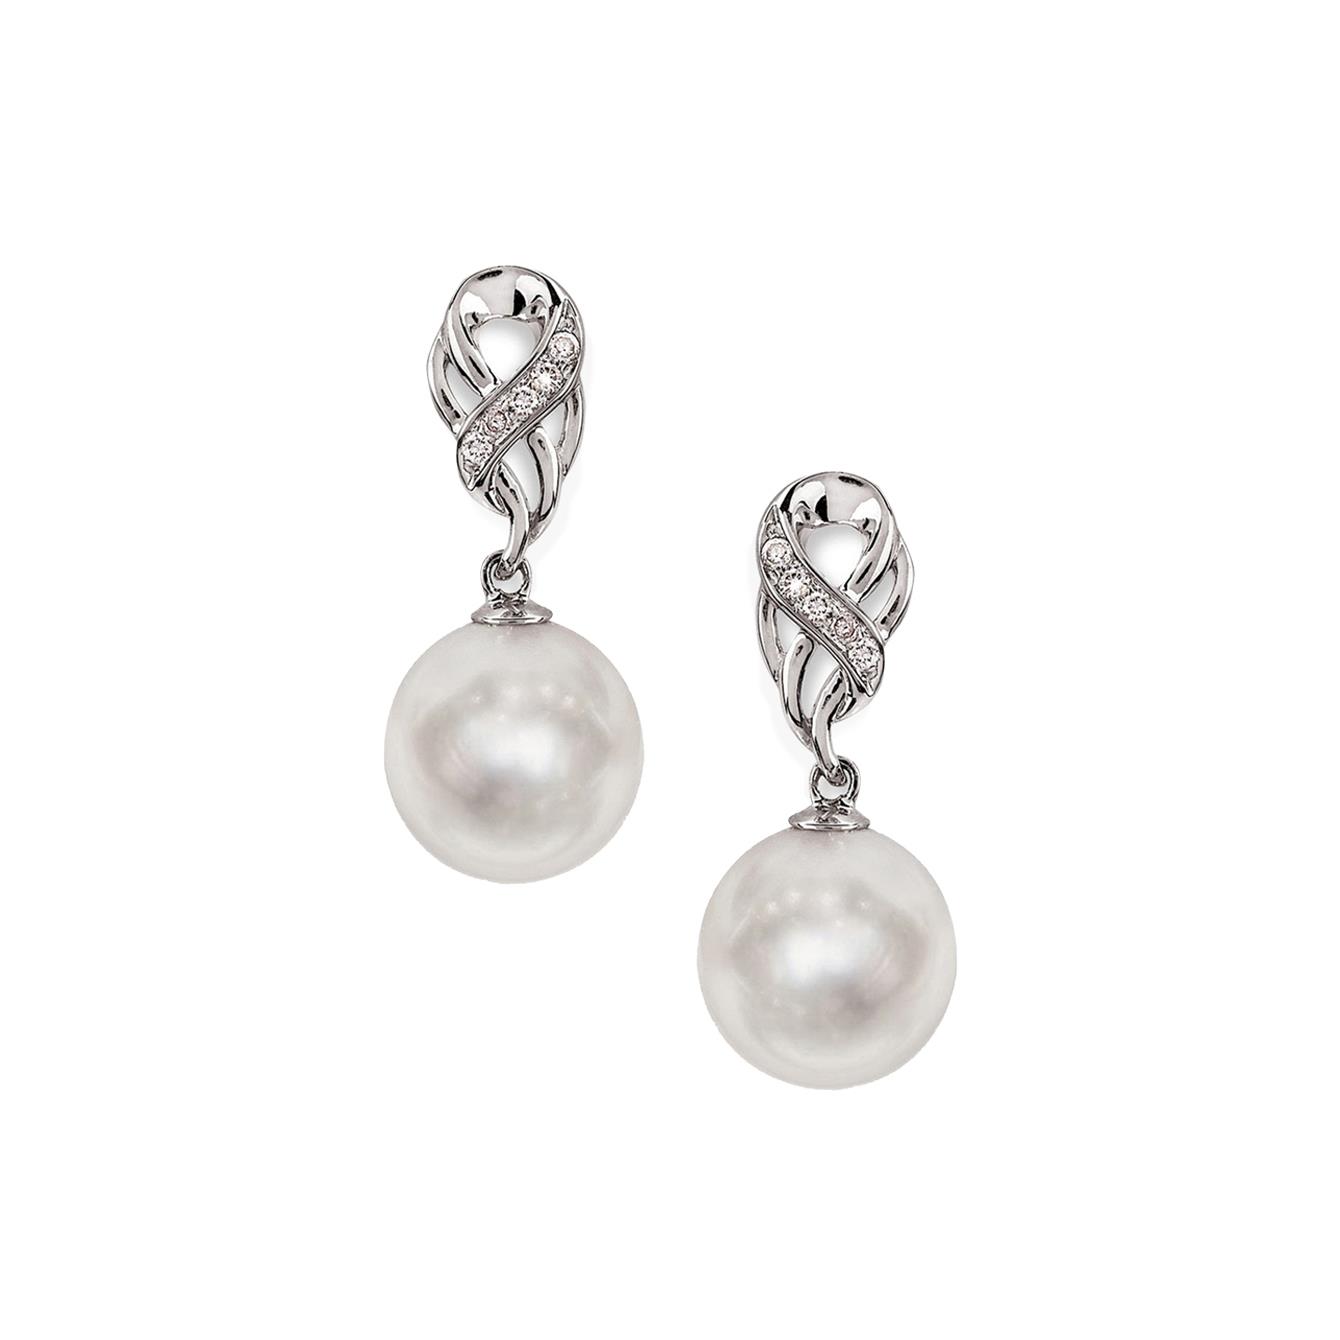 18kt white gold pendant earrings with full pearlescent pearl and diamonds - MAYUMI